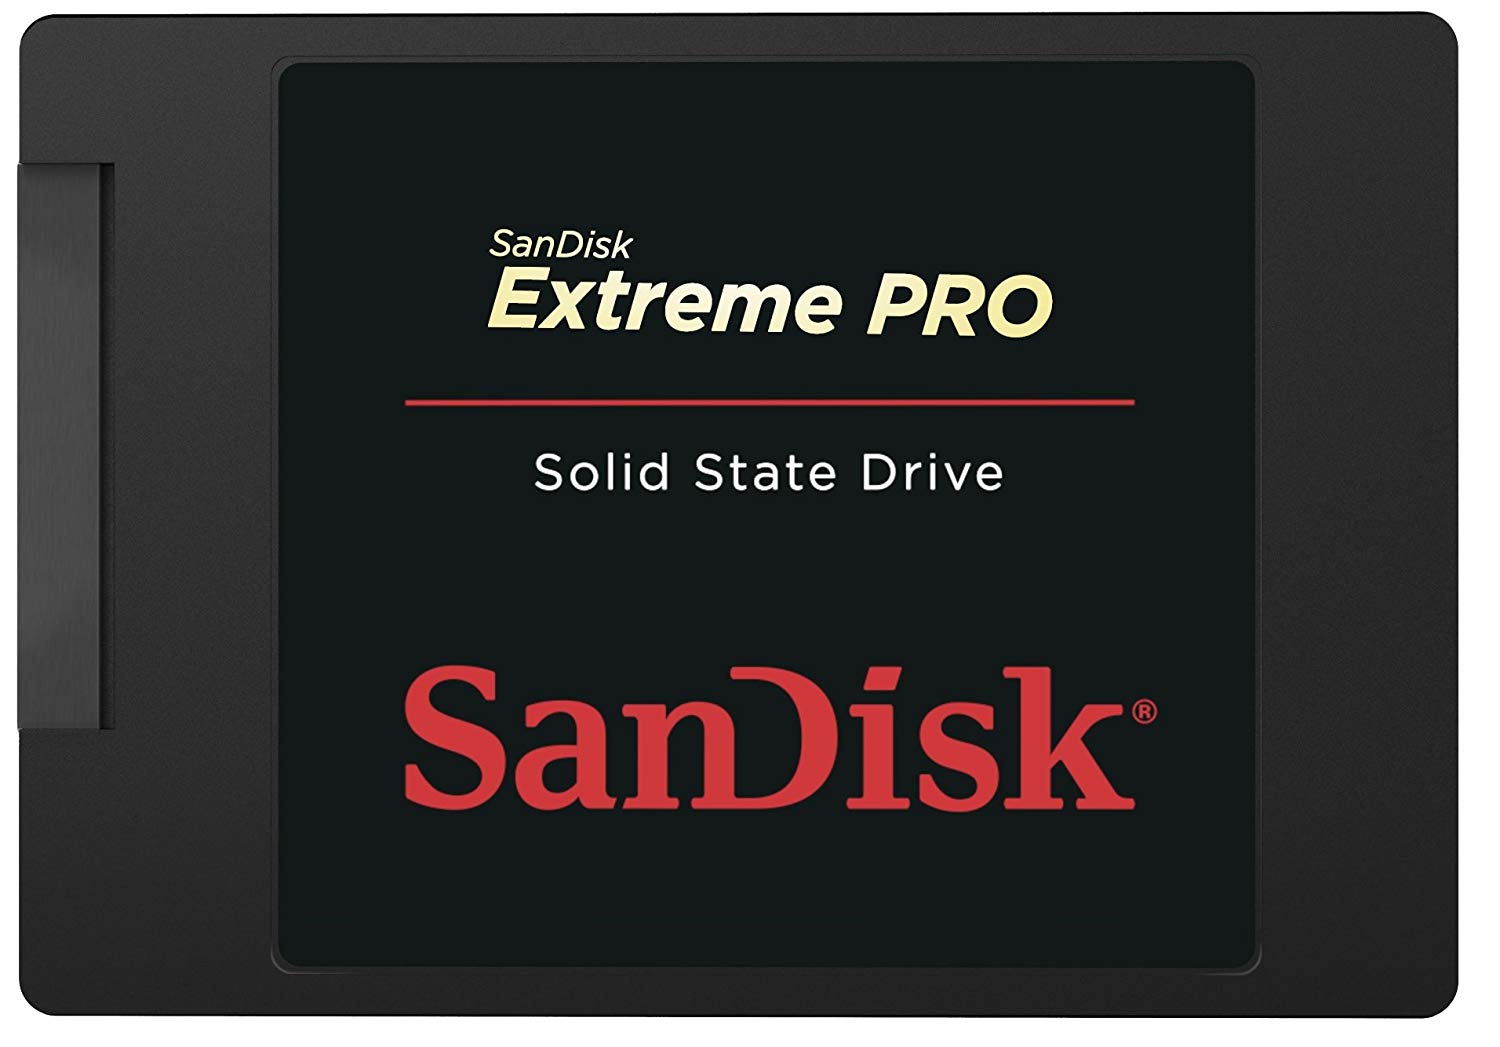 SanDisk Extreme PRO 240GB SATA 6.0Gb/s 2.5-Inch 7mm Height Solid State Drive (SSD)